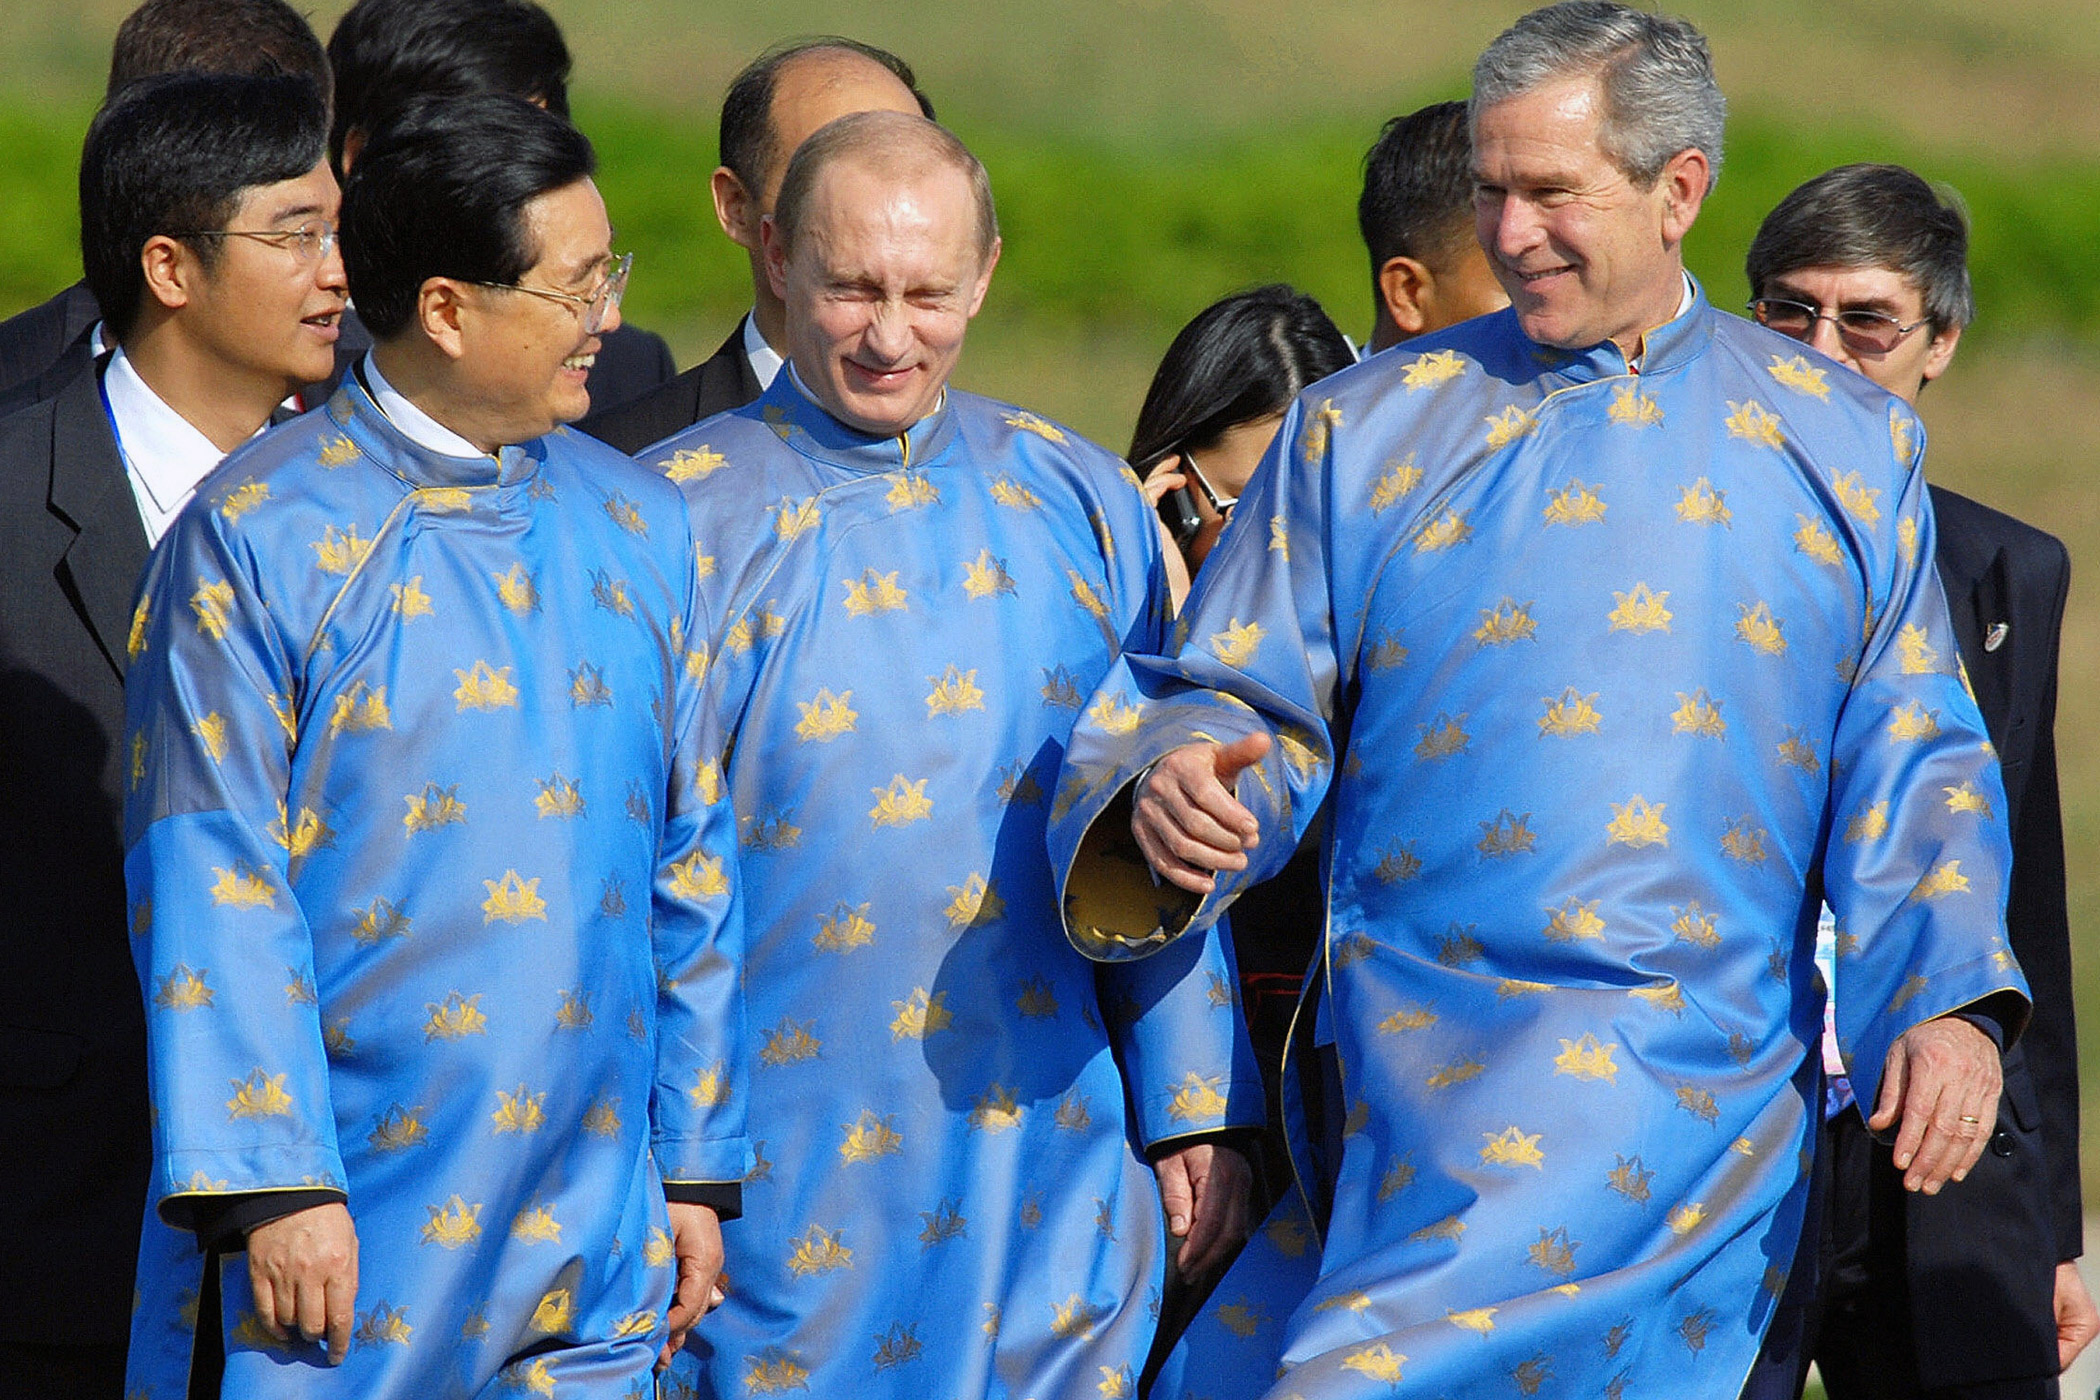 From left, Chinese President Hu Jintao, Russian President Vladimir Putin and U.S. President George W. Bush wear traditional attire during the APEC Summit in Hanoi on Nov. 19, 2006.